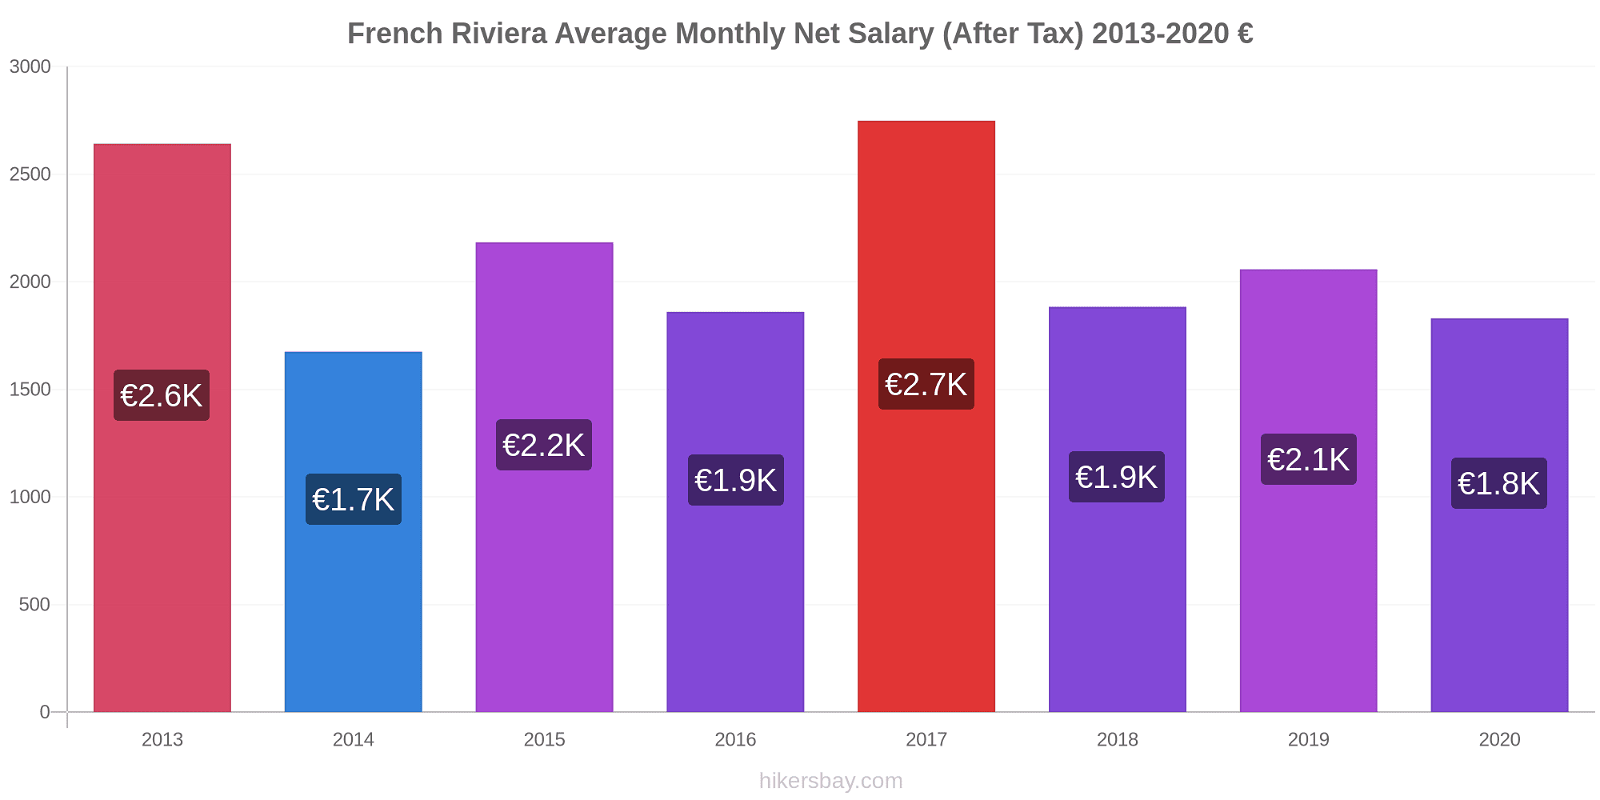 French Riviera price changes Average Monthly Net Salary (After Tax) hikersbay.com